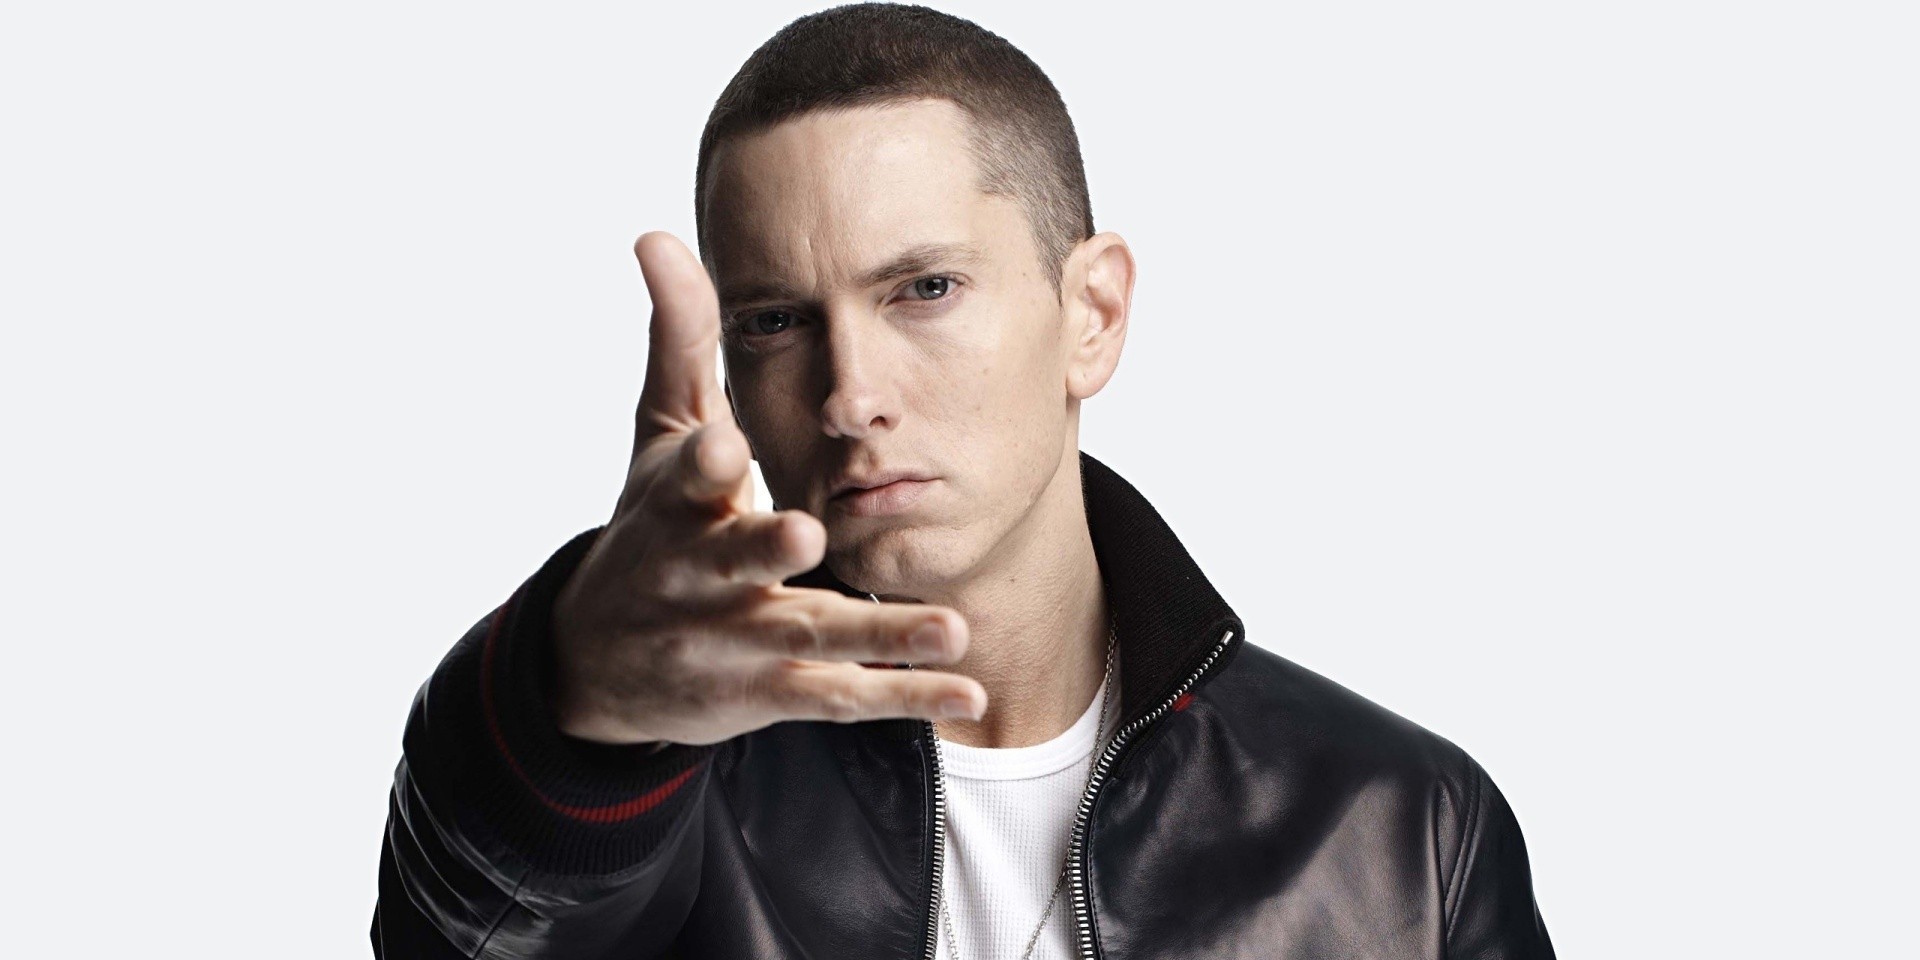 Eminem outsold everyone in 2018 to earn top spot in album sales